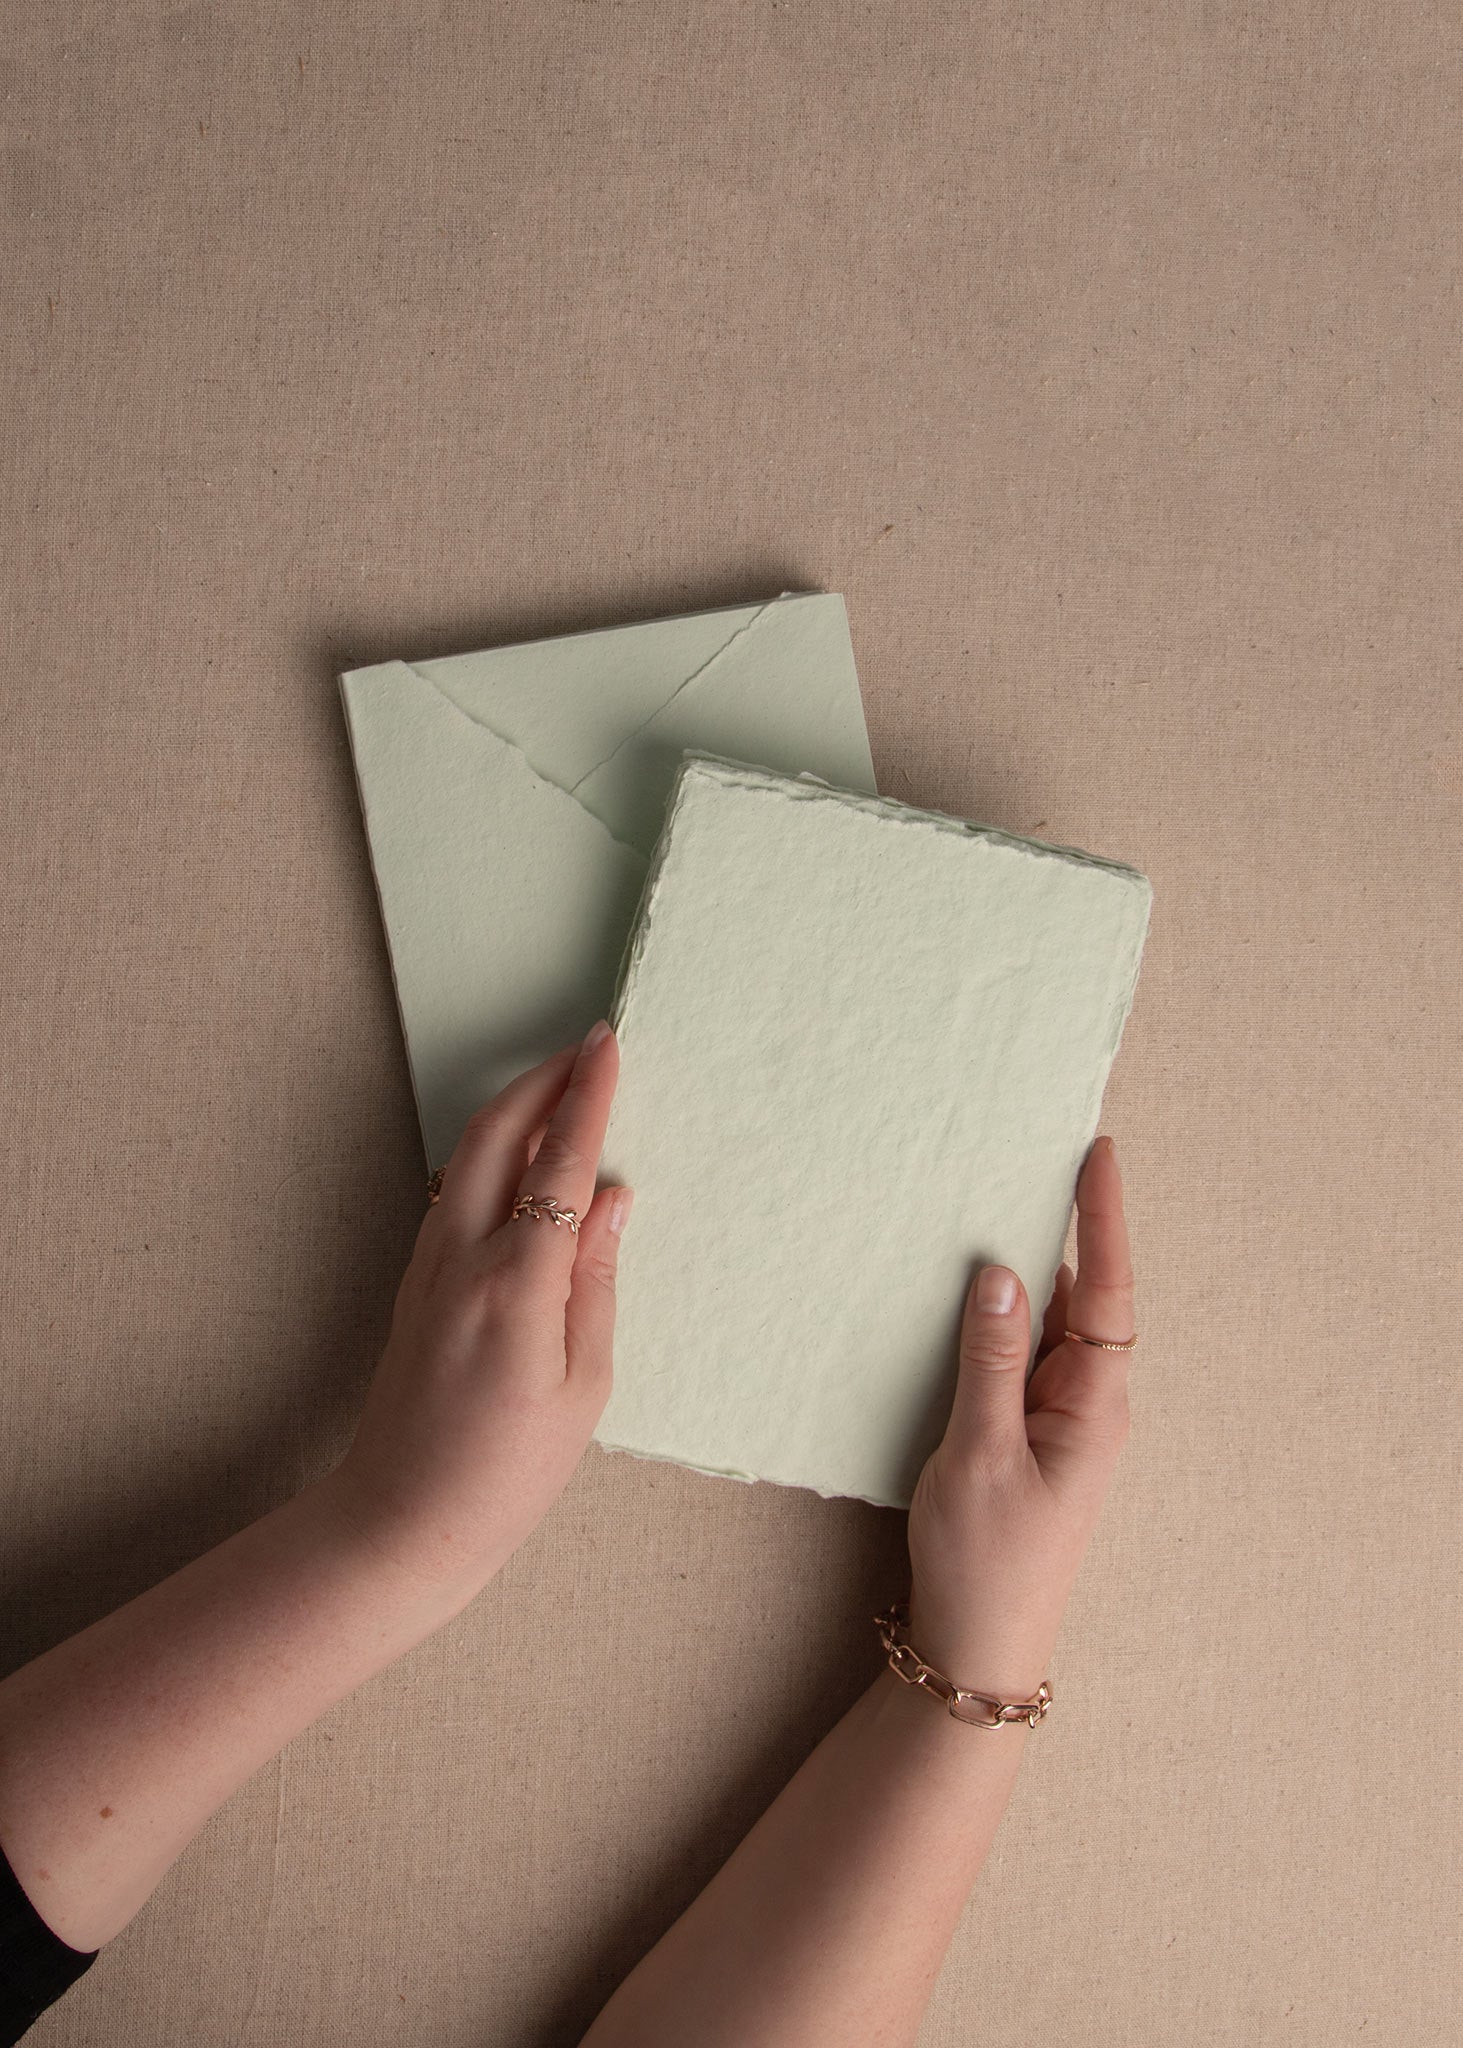 Elevated view of woman’s hand holding Mint Green 5x7 inch handmade paper sheet with deckle edge and matching envelope